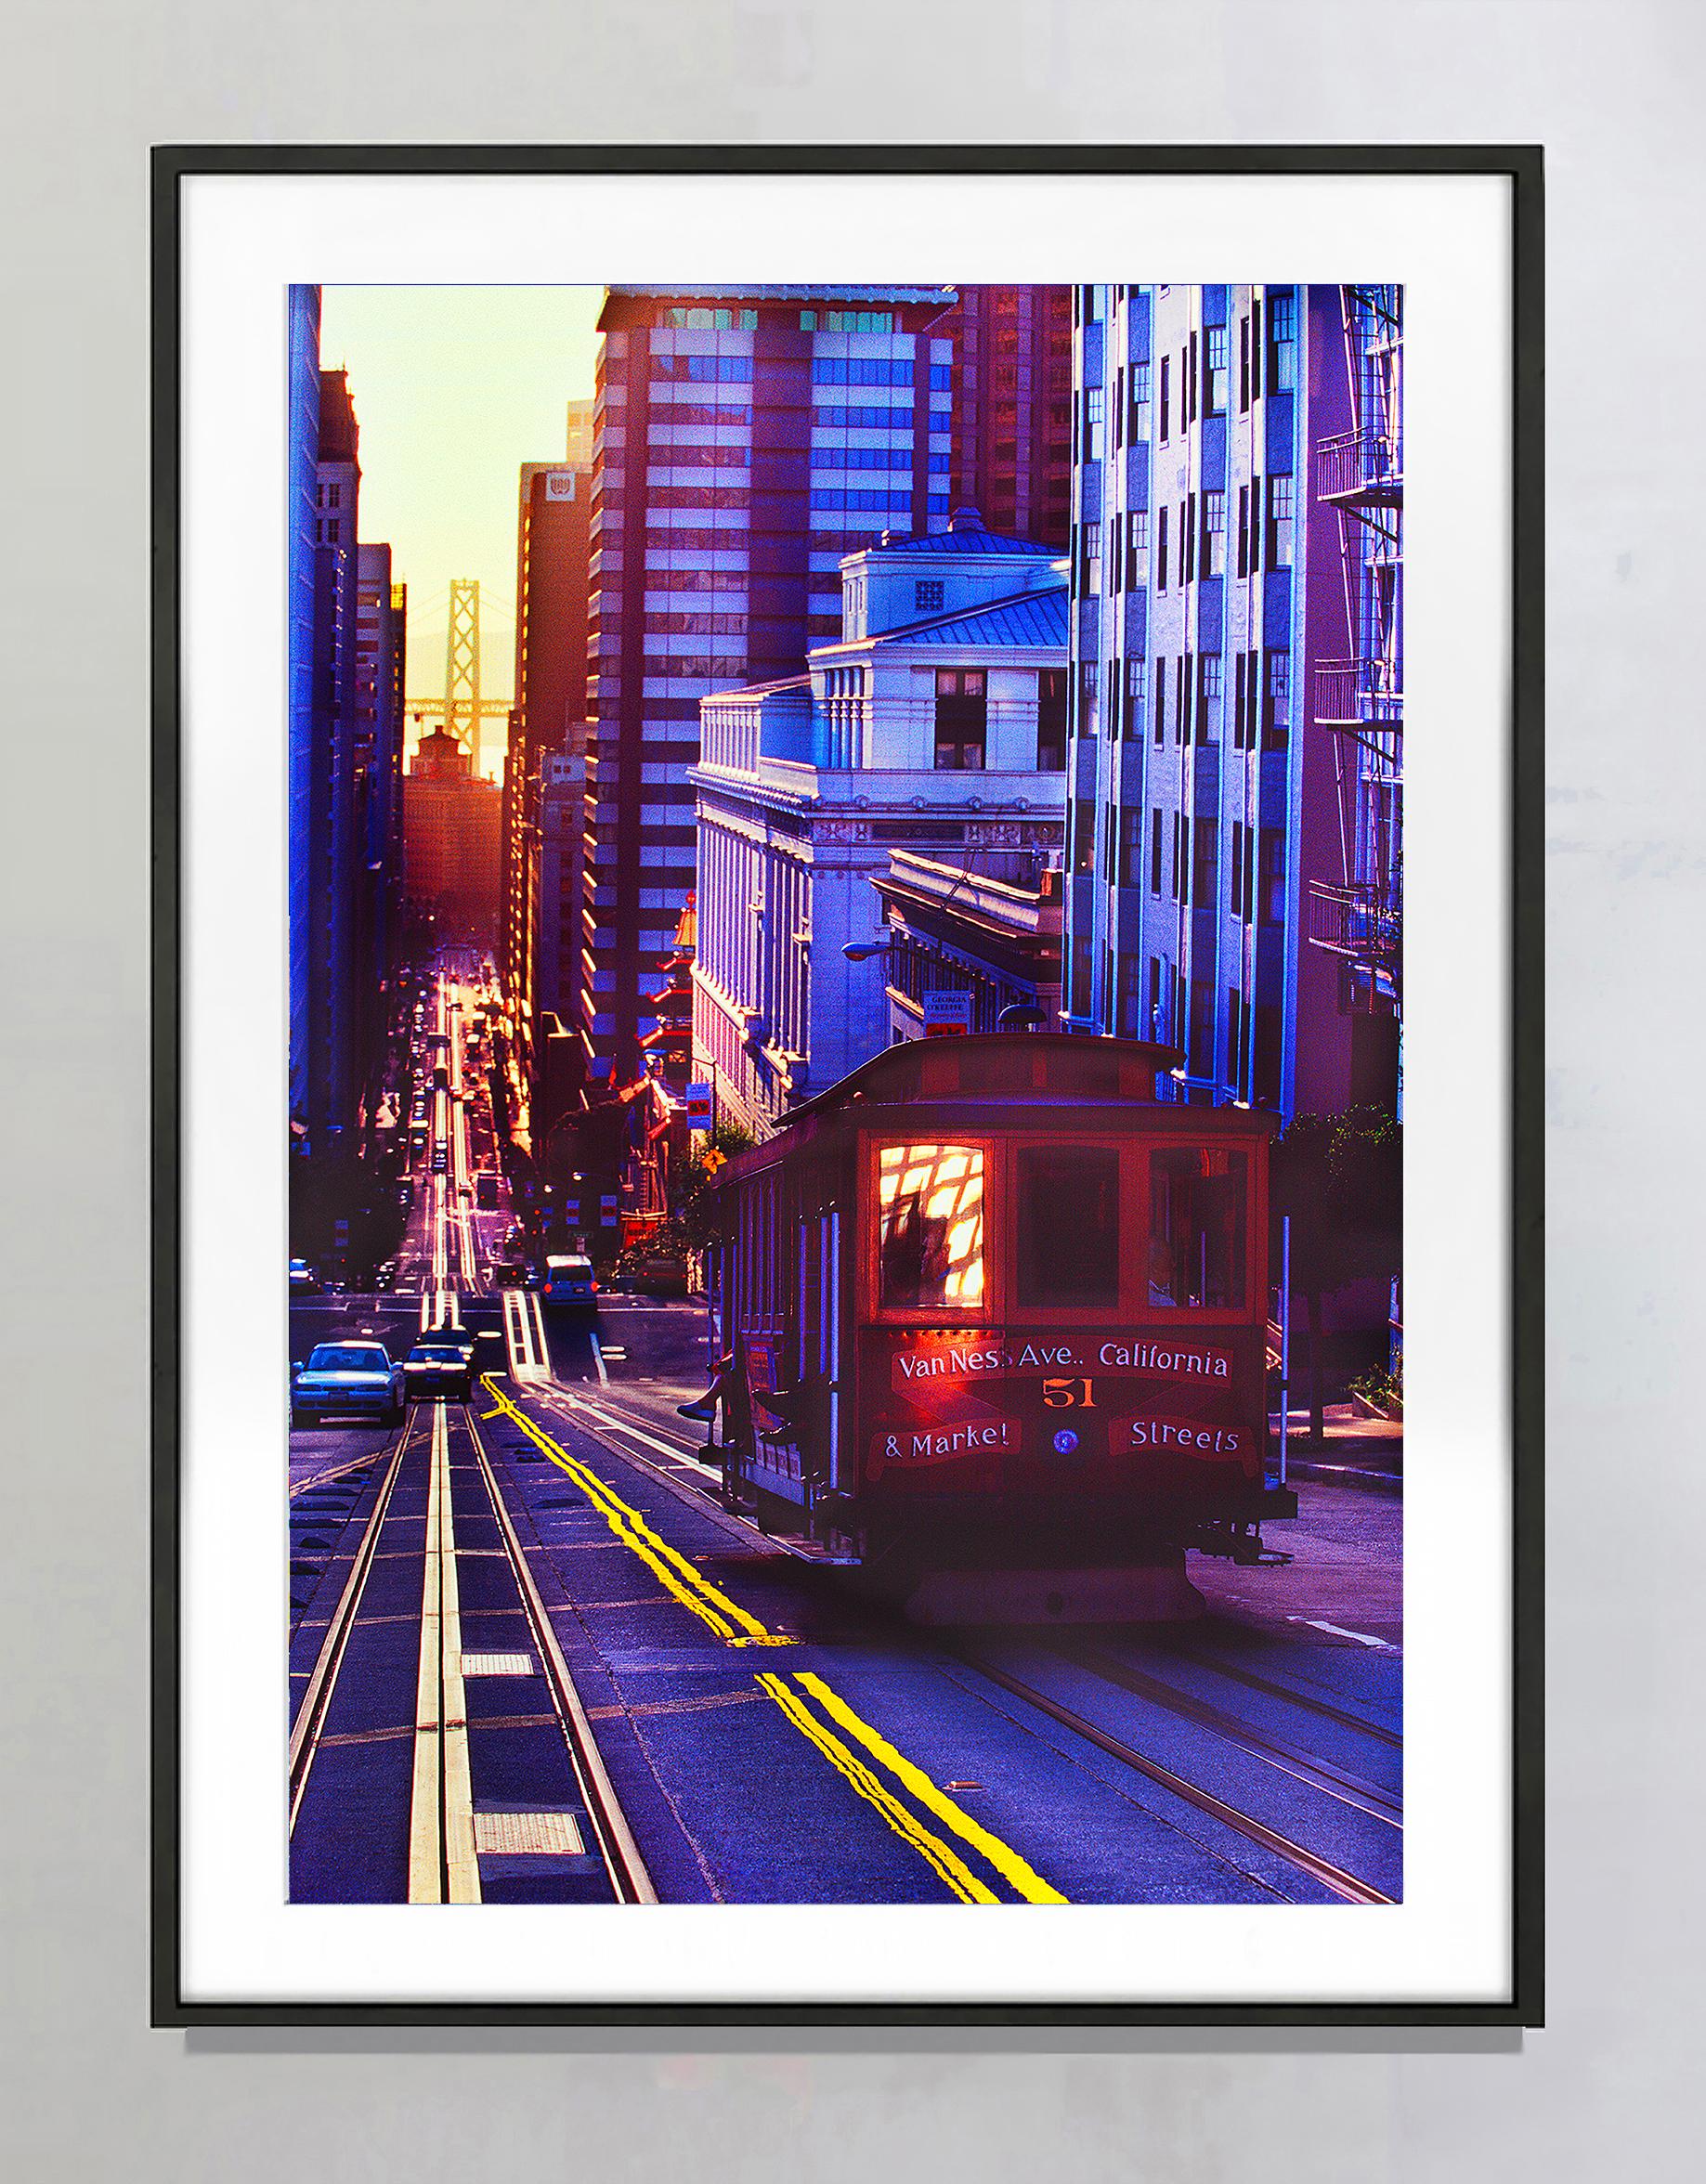 Portrait of a San Francisco Cable Car Soaked in Bronze Light  - Photograph by Mitchell Funk